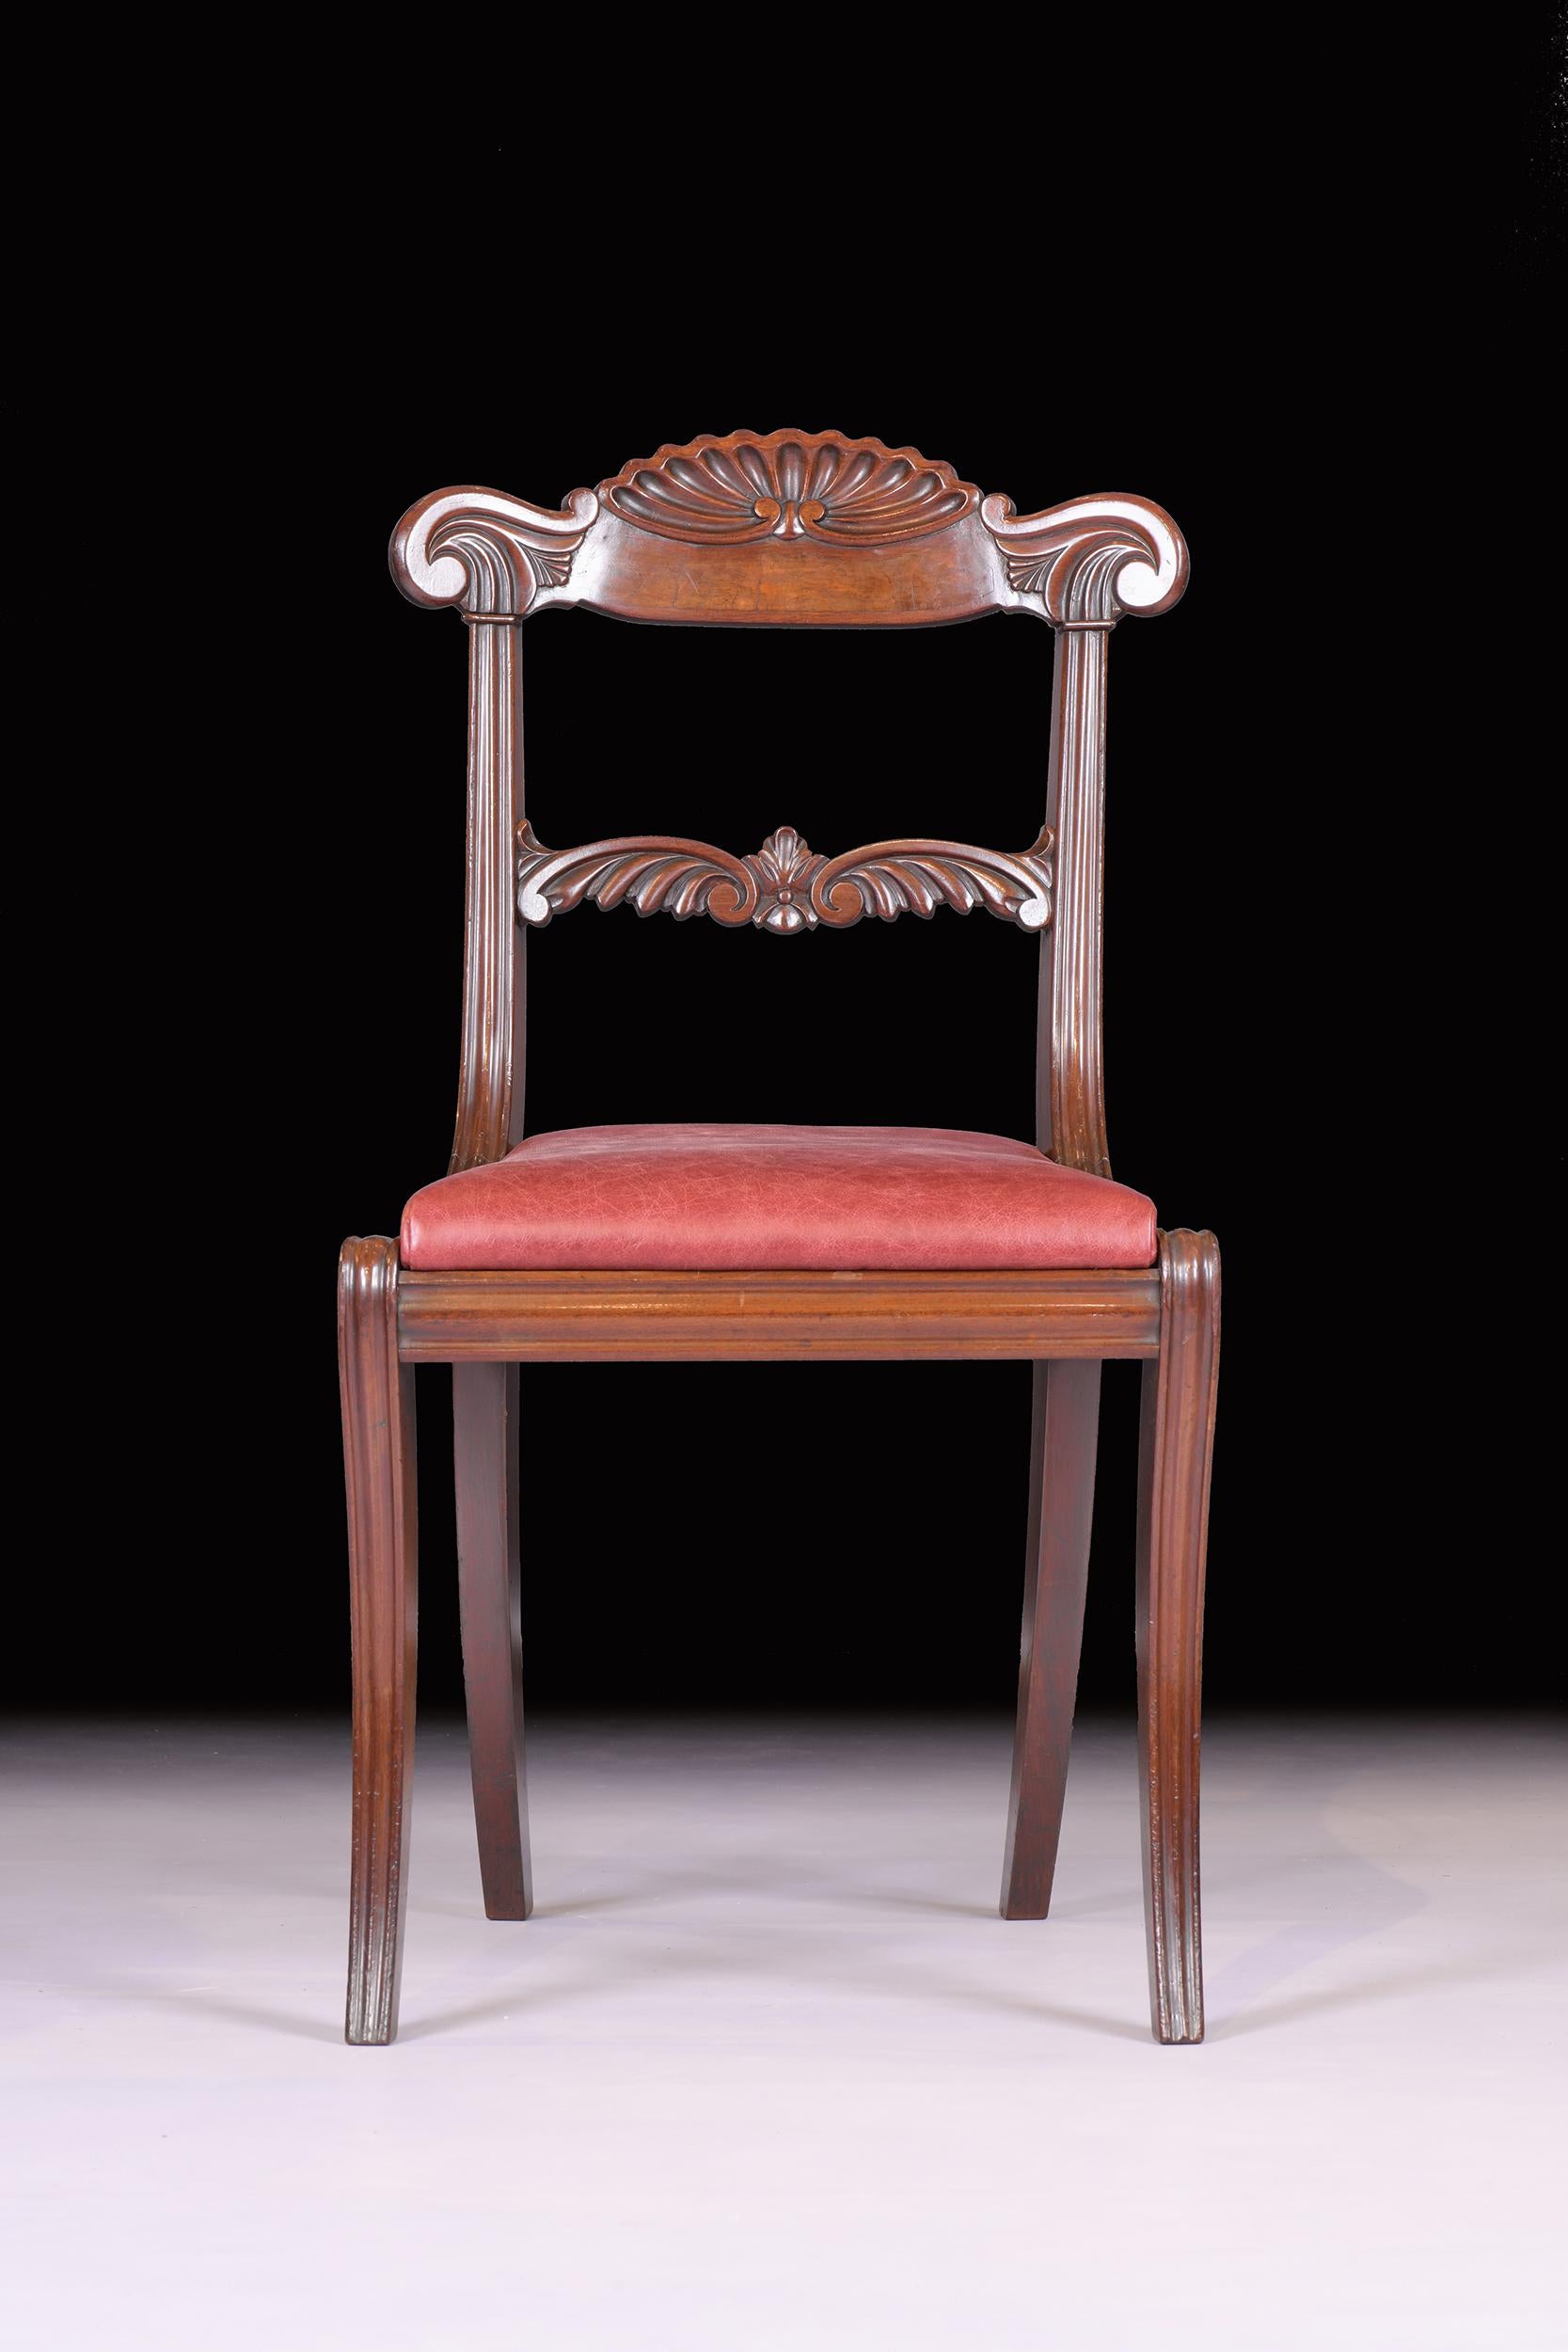 Set of 10 Early 19th Century Regency Mahogany Dining Room Chairs For Sale 3